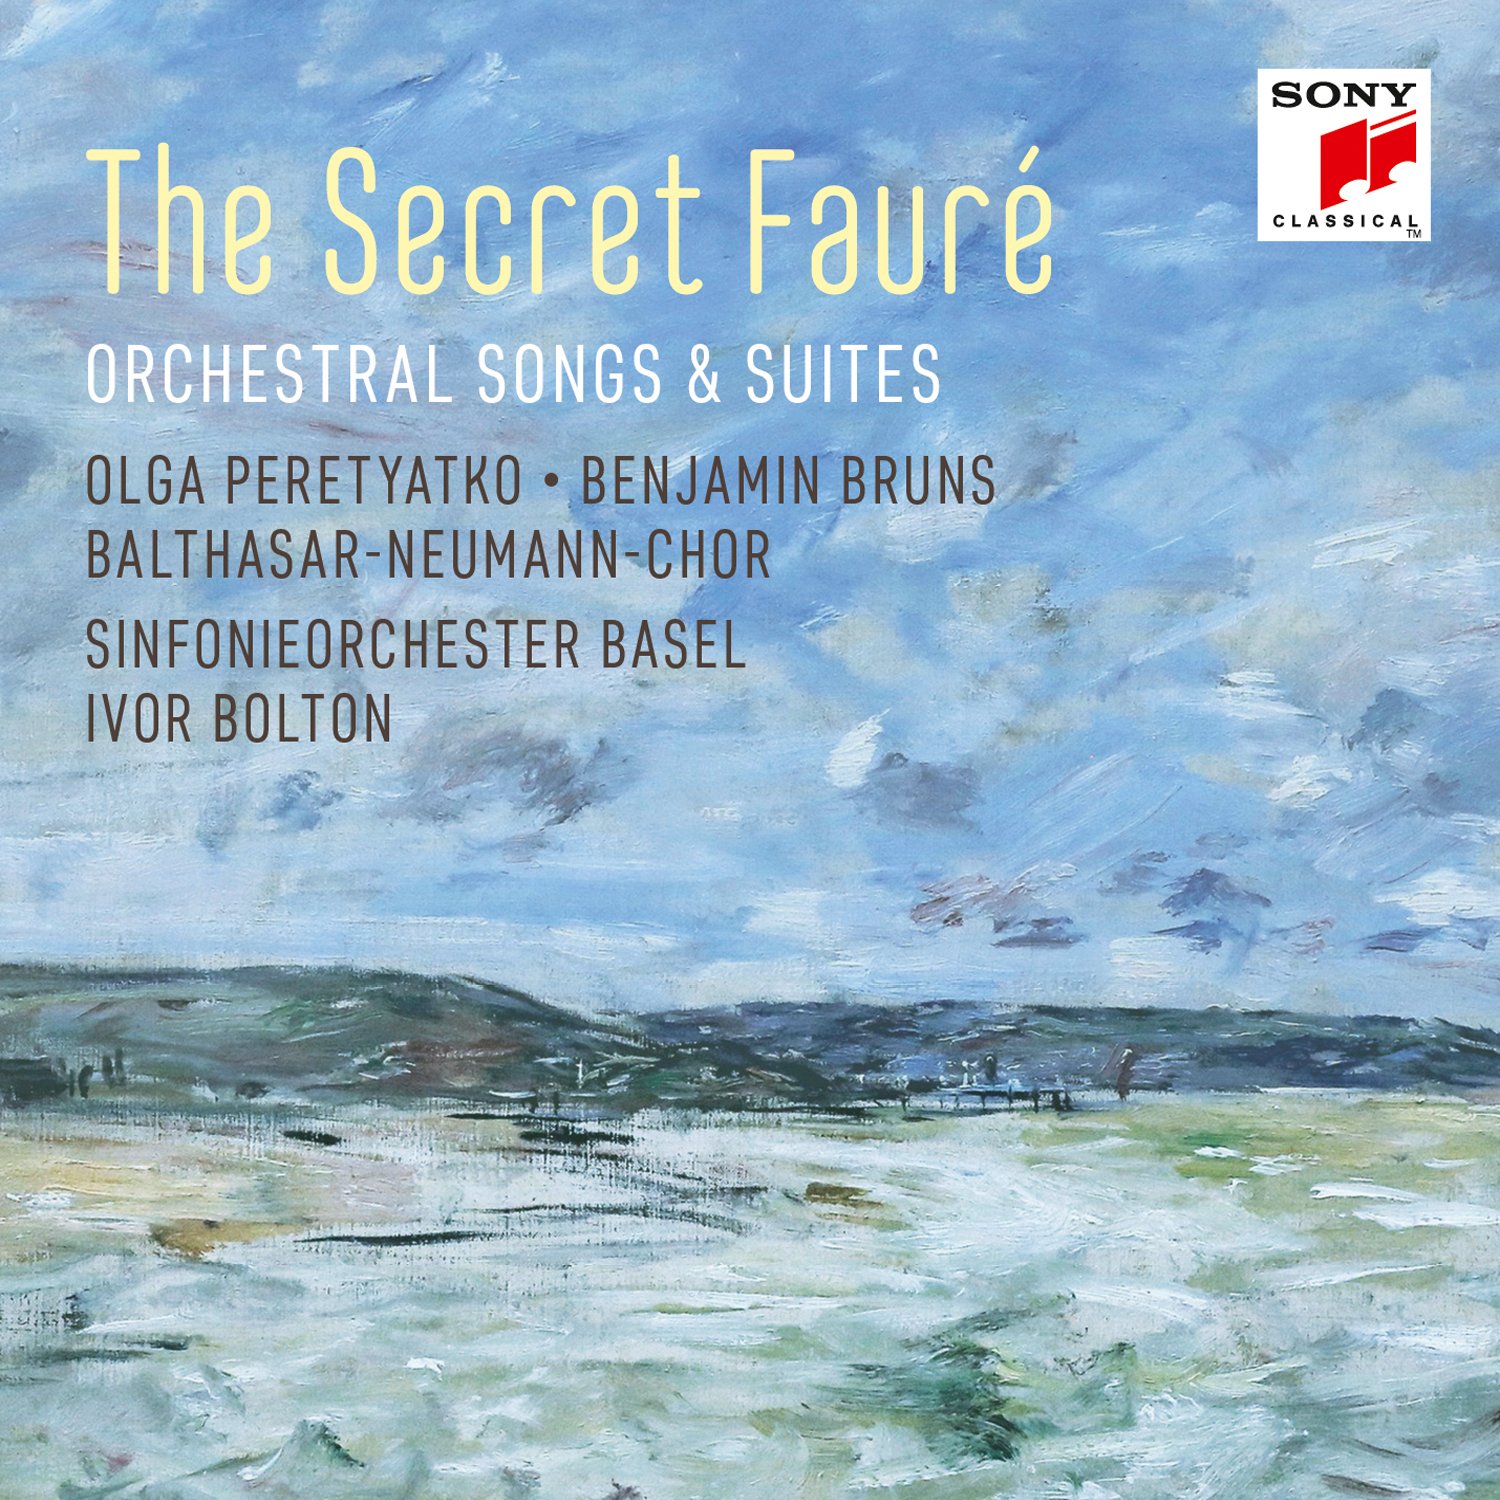  The Secret Fauré. Orchestral songs and suites